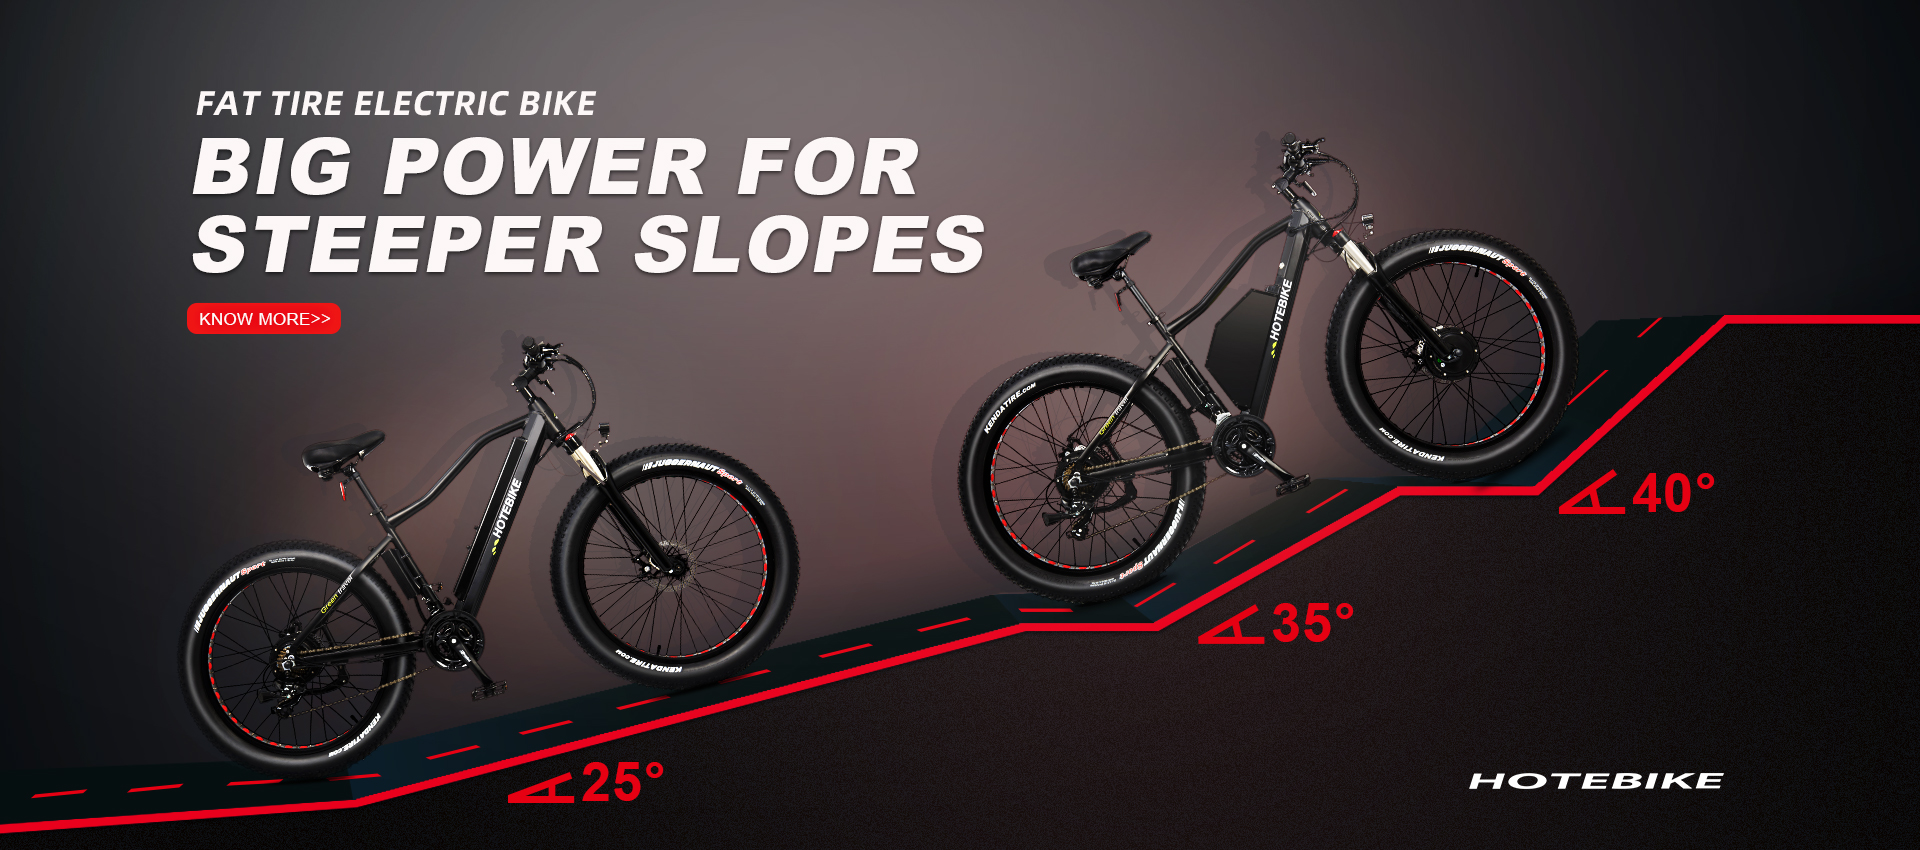 E-bike Market Projected To Witness Vigorous Expansion By 2026 - blog - 1